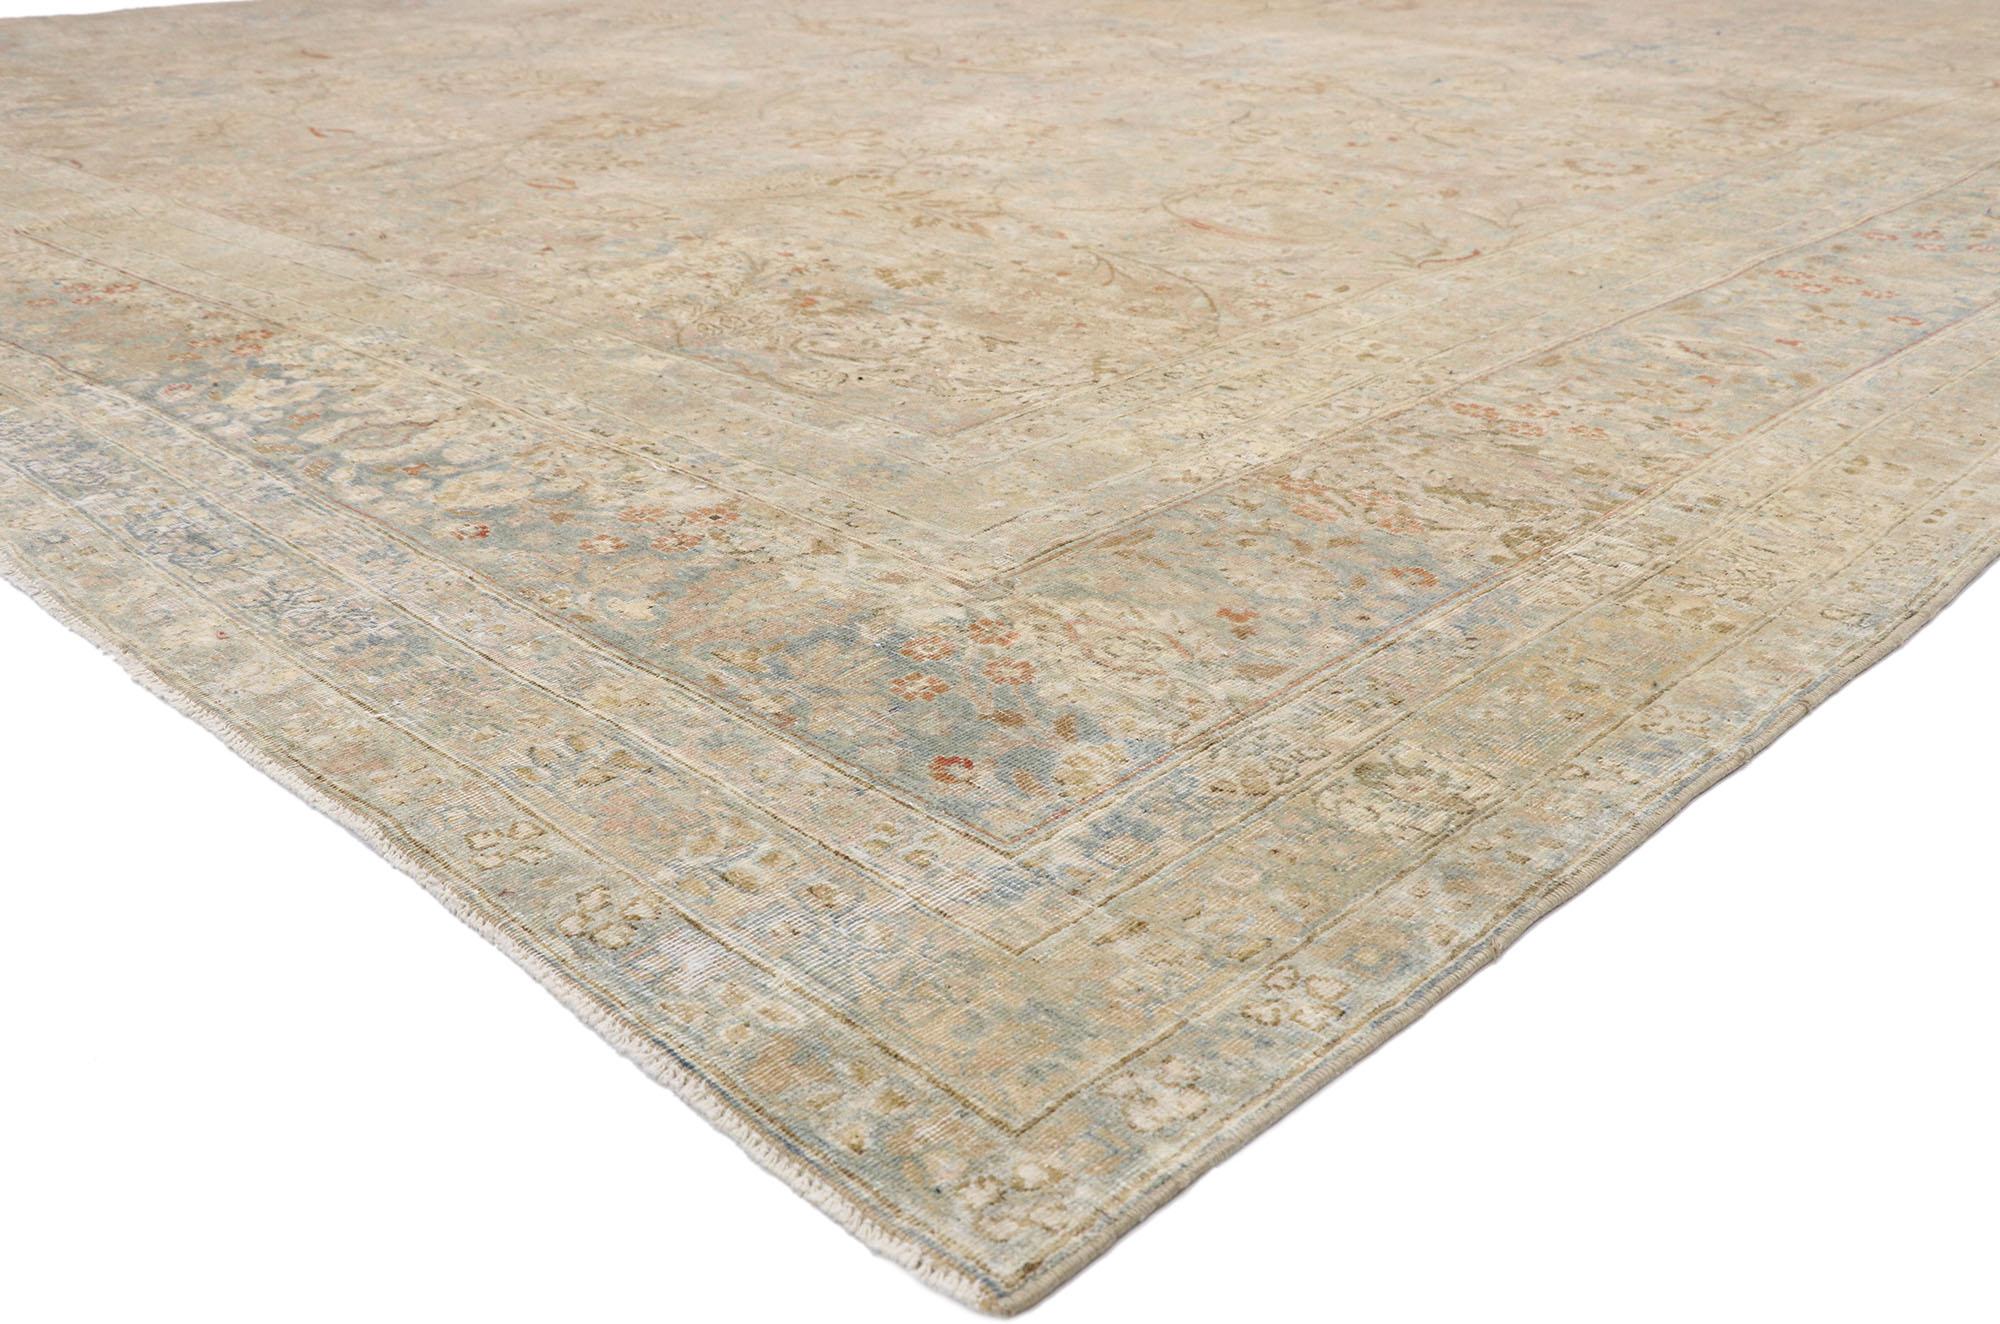 52678, Distressed Antique Persian Khorassan Design Rug with Rustic English Manor Style. With a timeless floral pattern and lovingly timeworn appearance, this hand knotted wool distressed antique Persian Khorassan design rug beautifully embodies